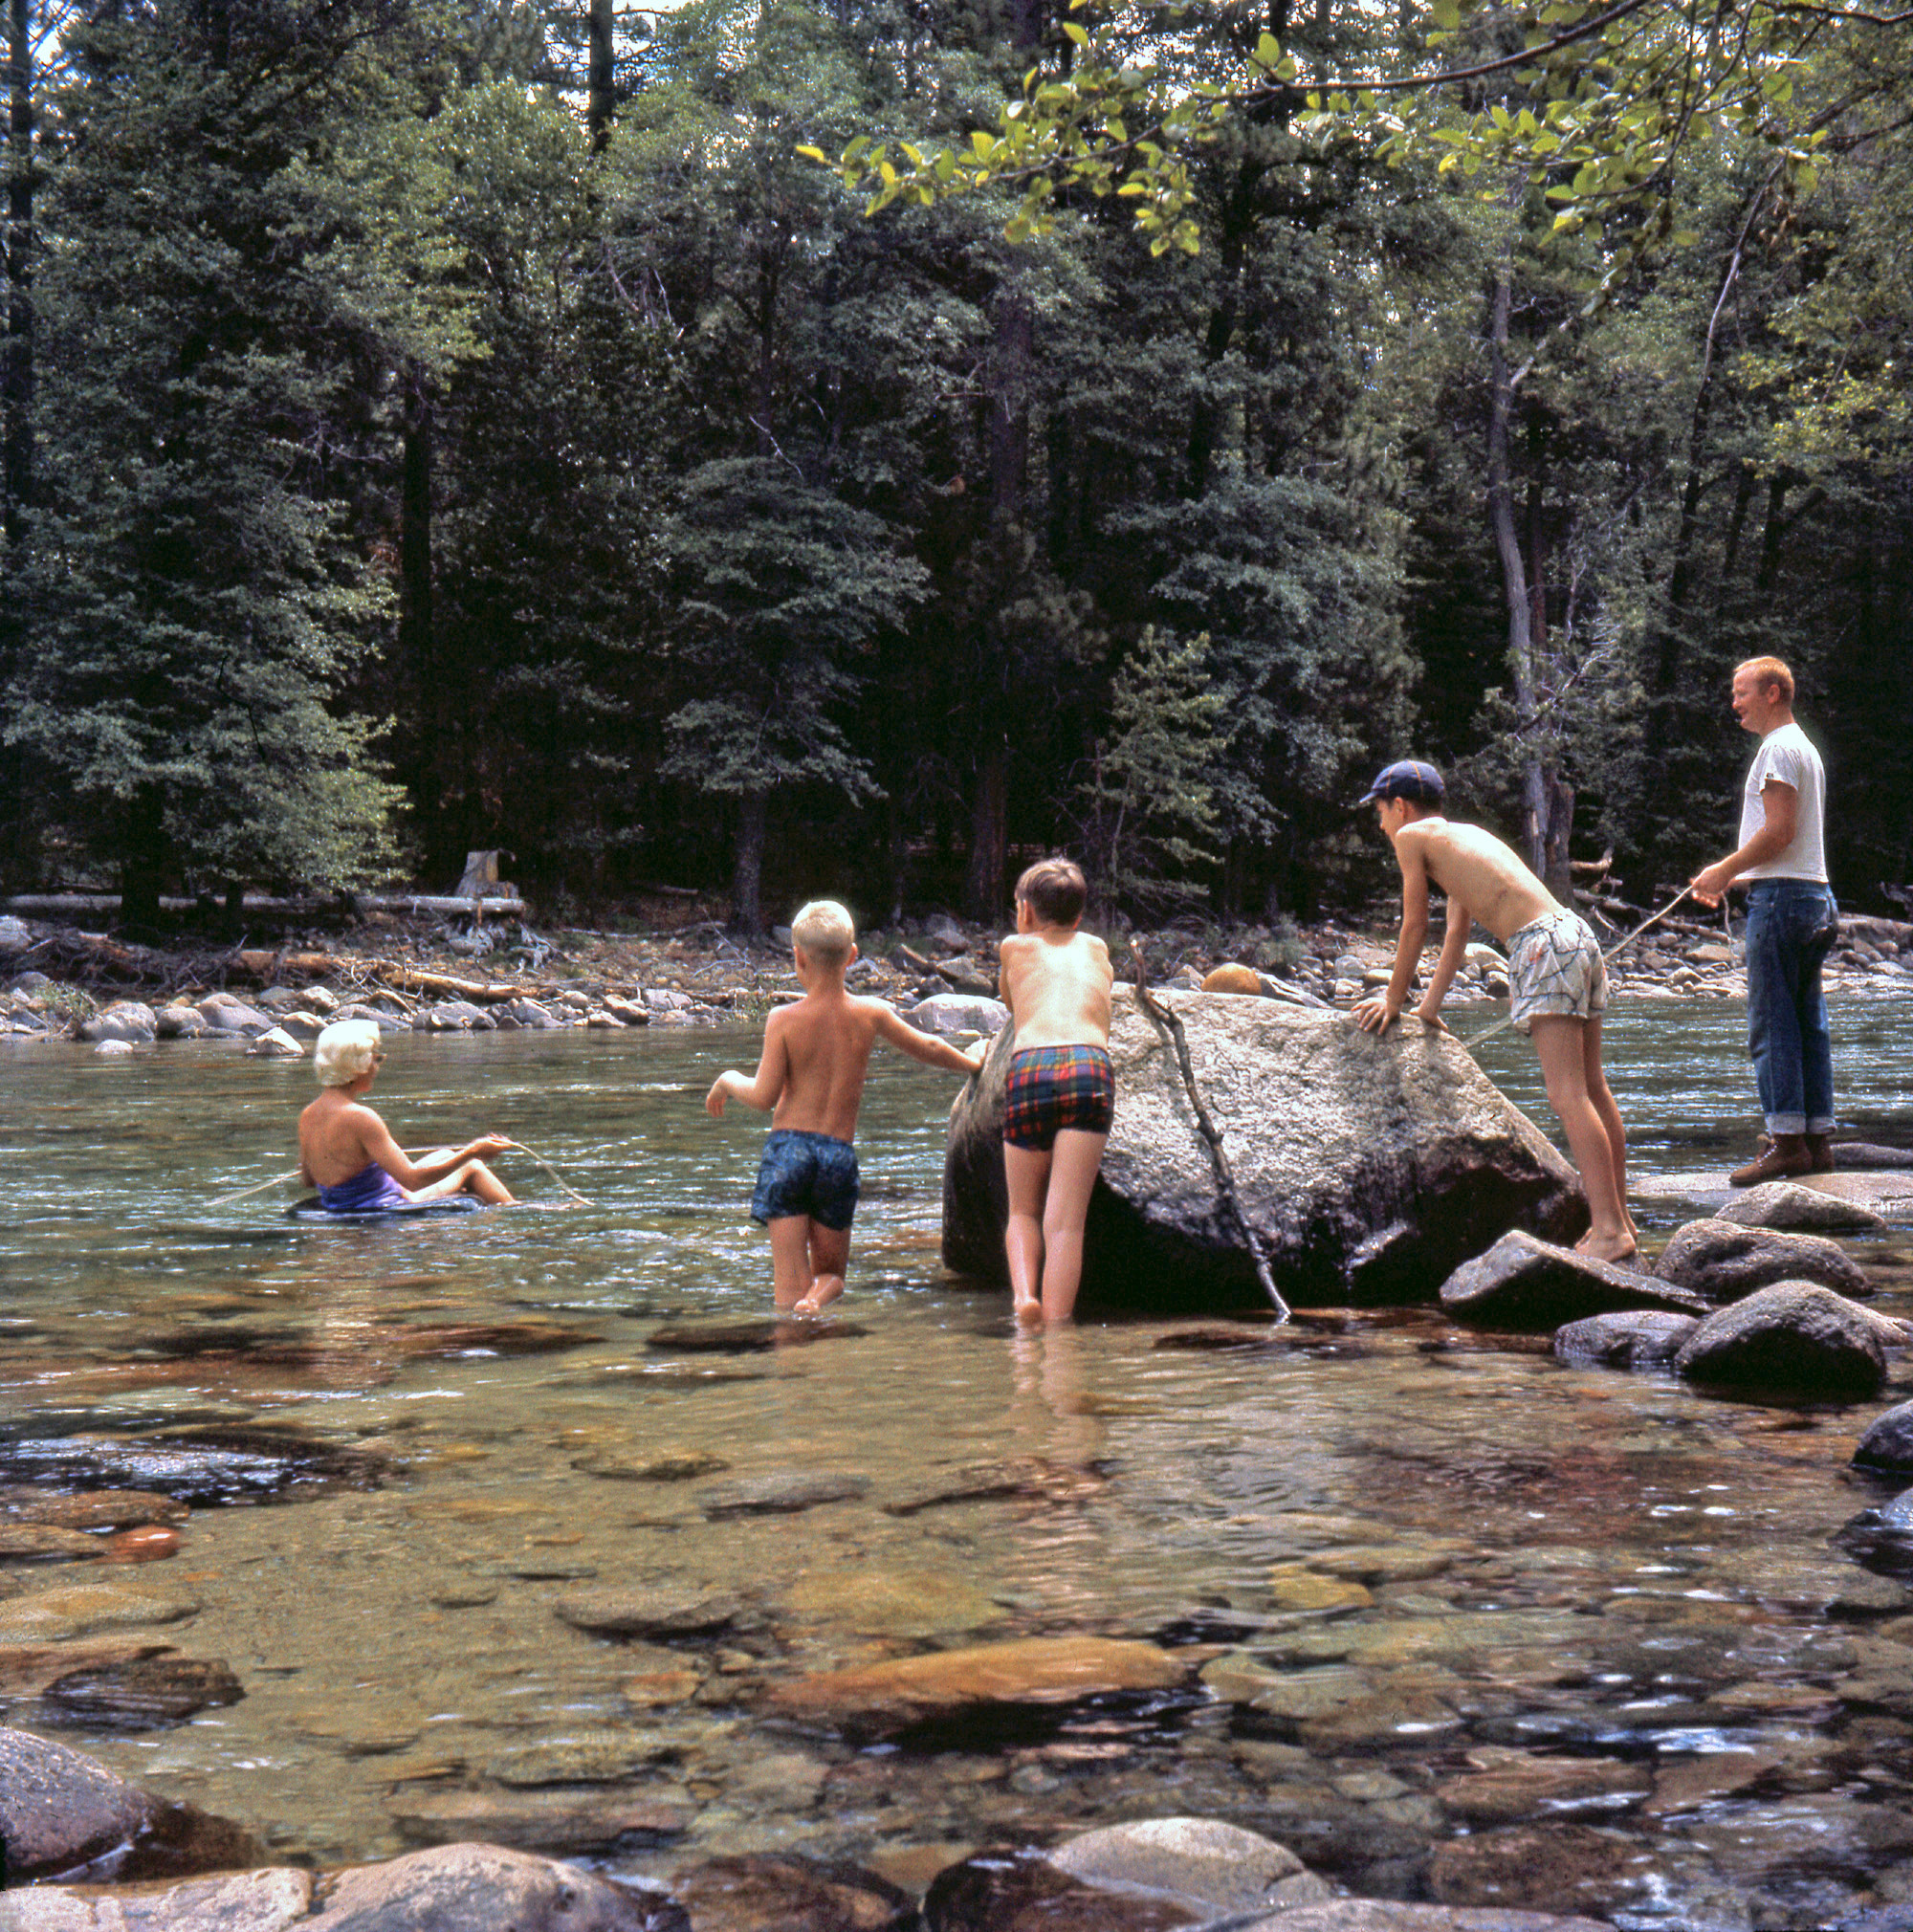 From slides found in a thrift store along with others taken around 1956 in Southern California. Not quite up there with Hubert Tuttle/Norman Rockwell but a slice of 50's life none the less. View full size.